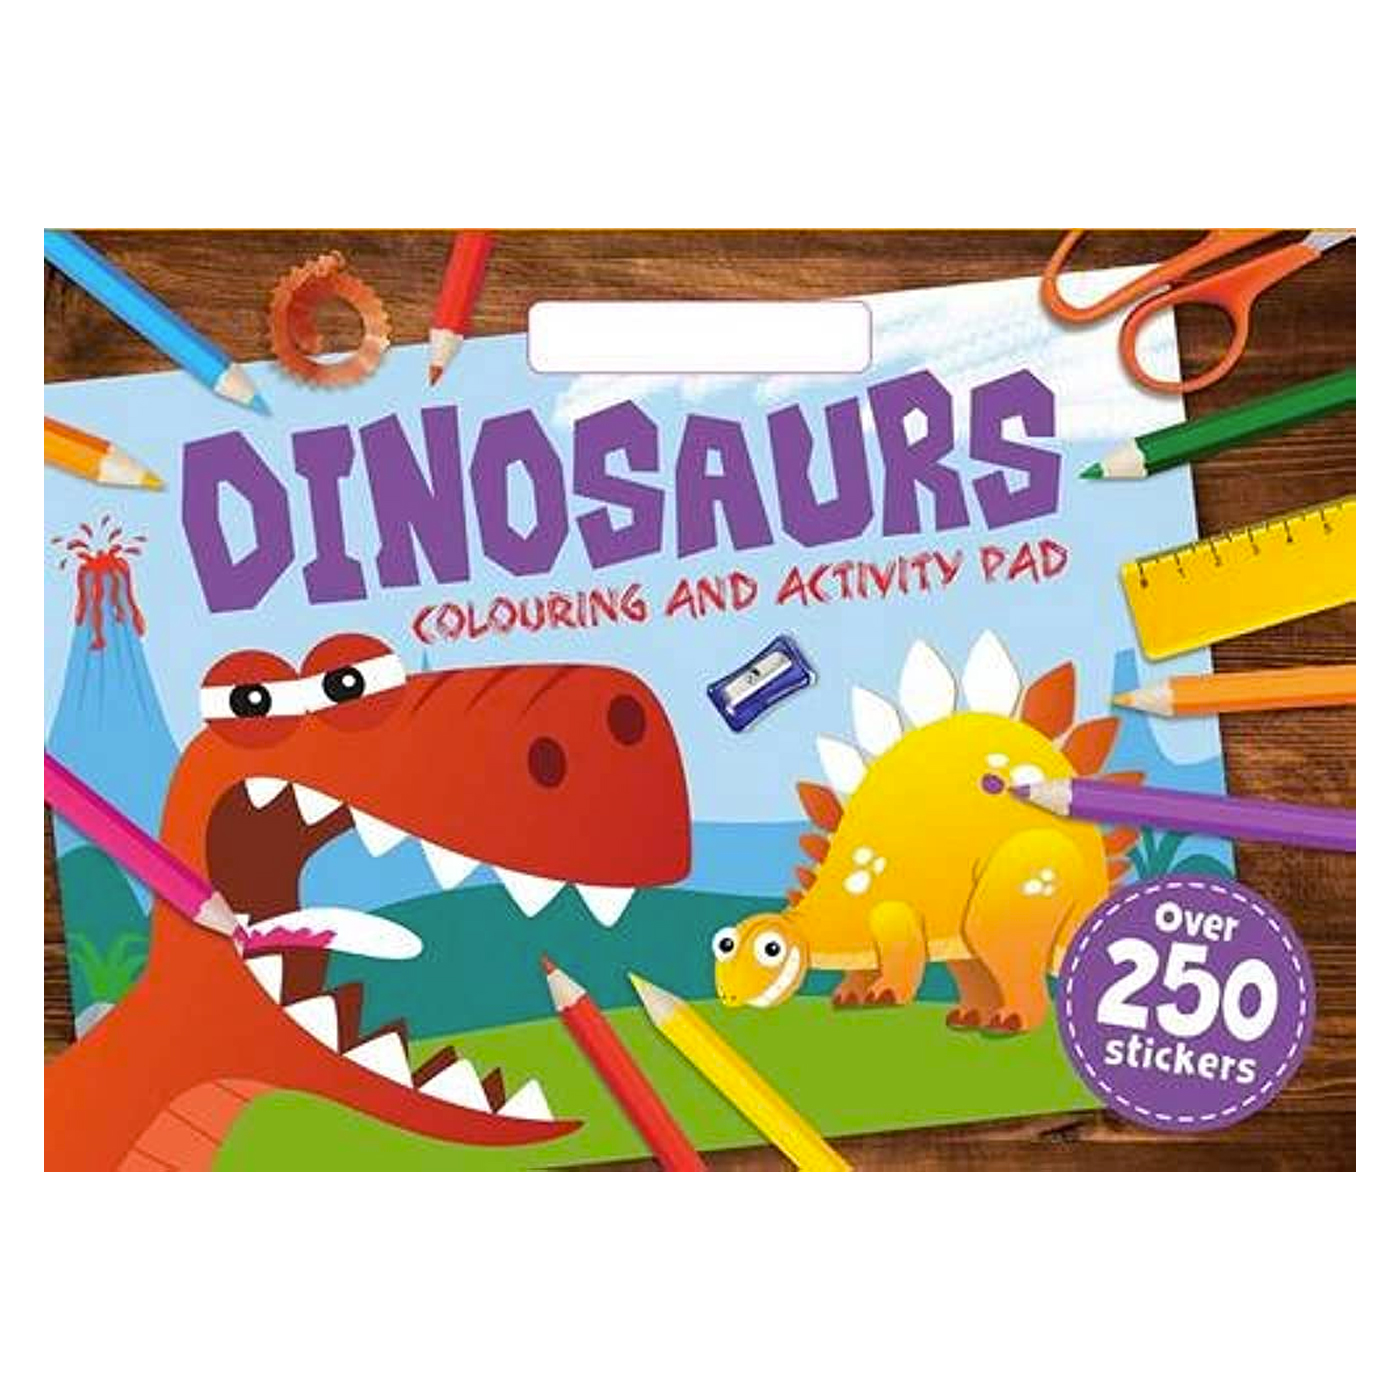  Dinosaurs Colouring and Activity Pad